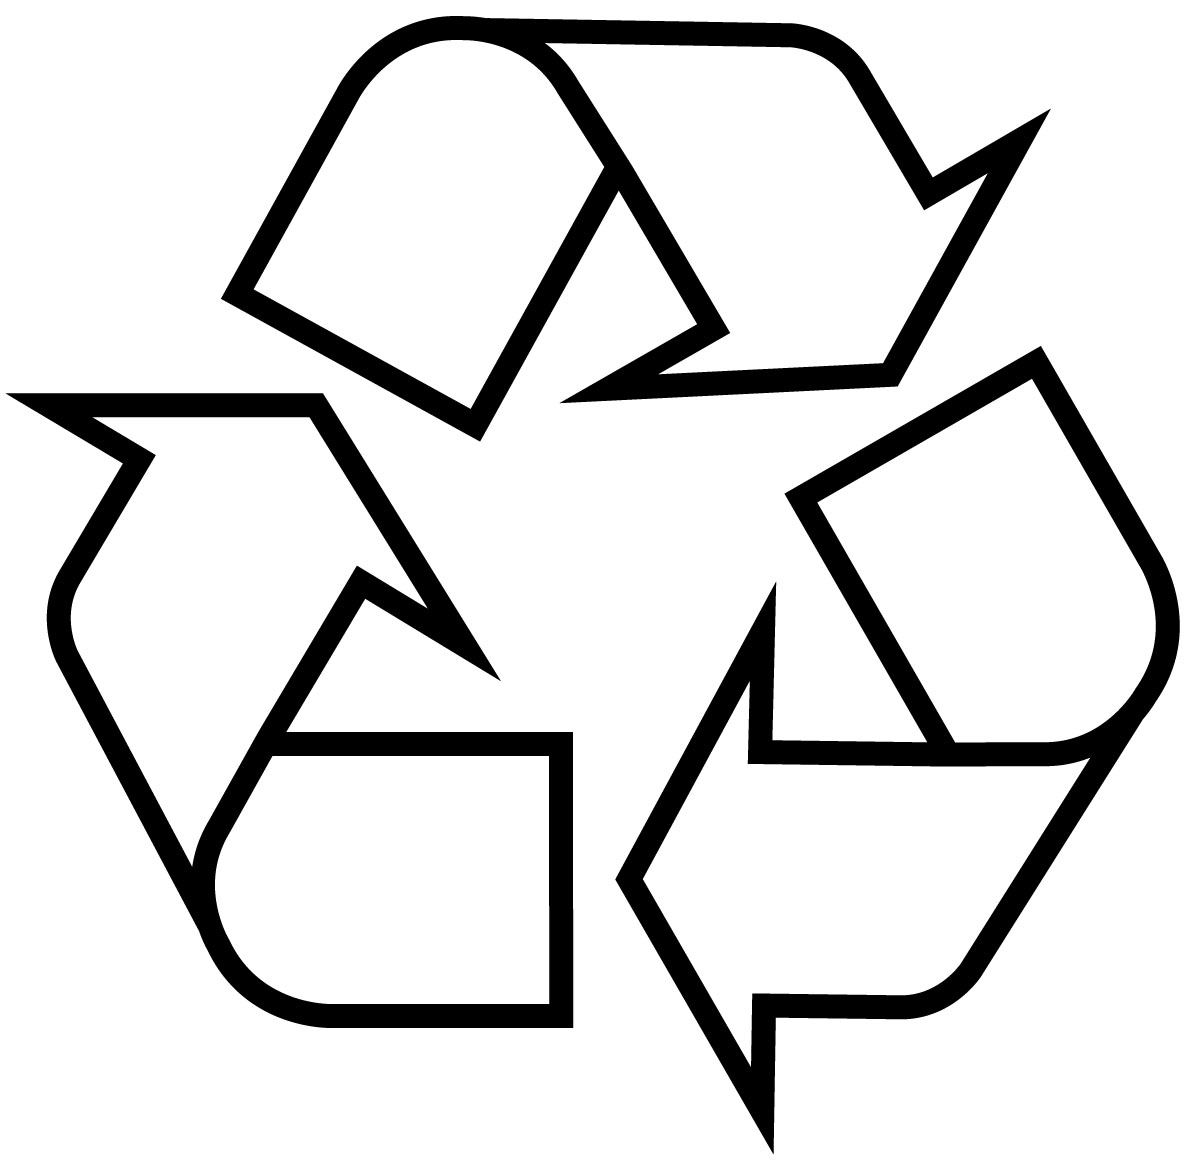 Recycle Symbol - Clipart library